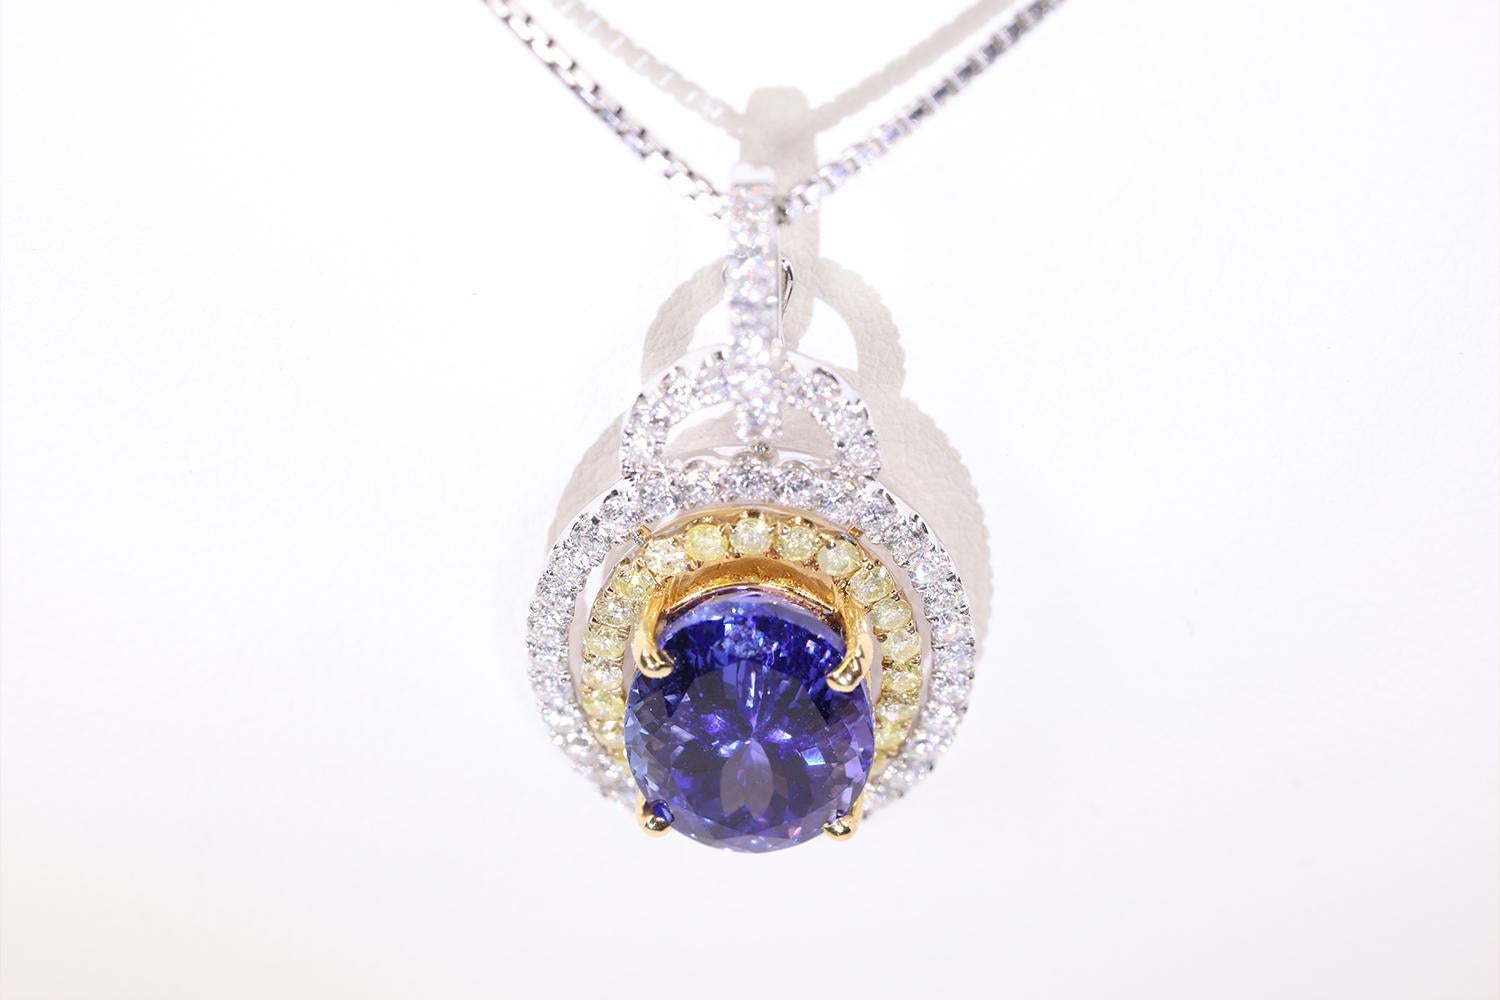 7 Carat Tanzanite Pendant with White & Yellow Diamonds Set in 2 Tone 18K Gold In New Condition For Sale In Manchester By The Sea, MA